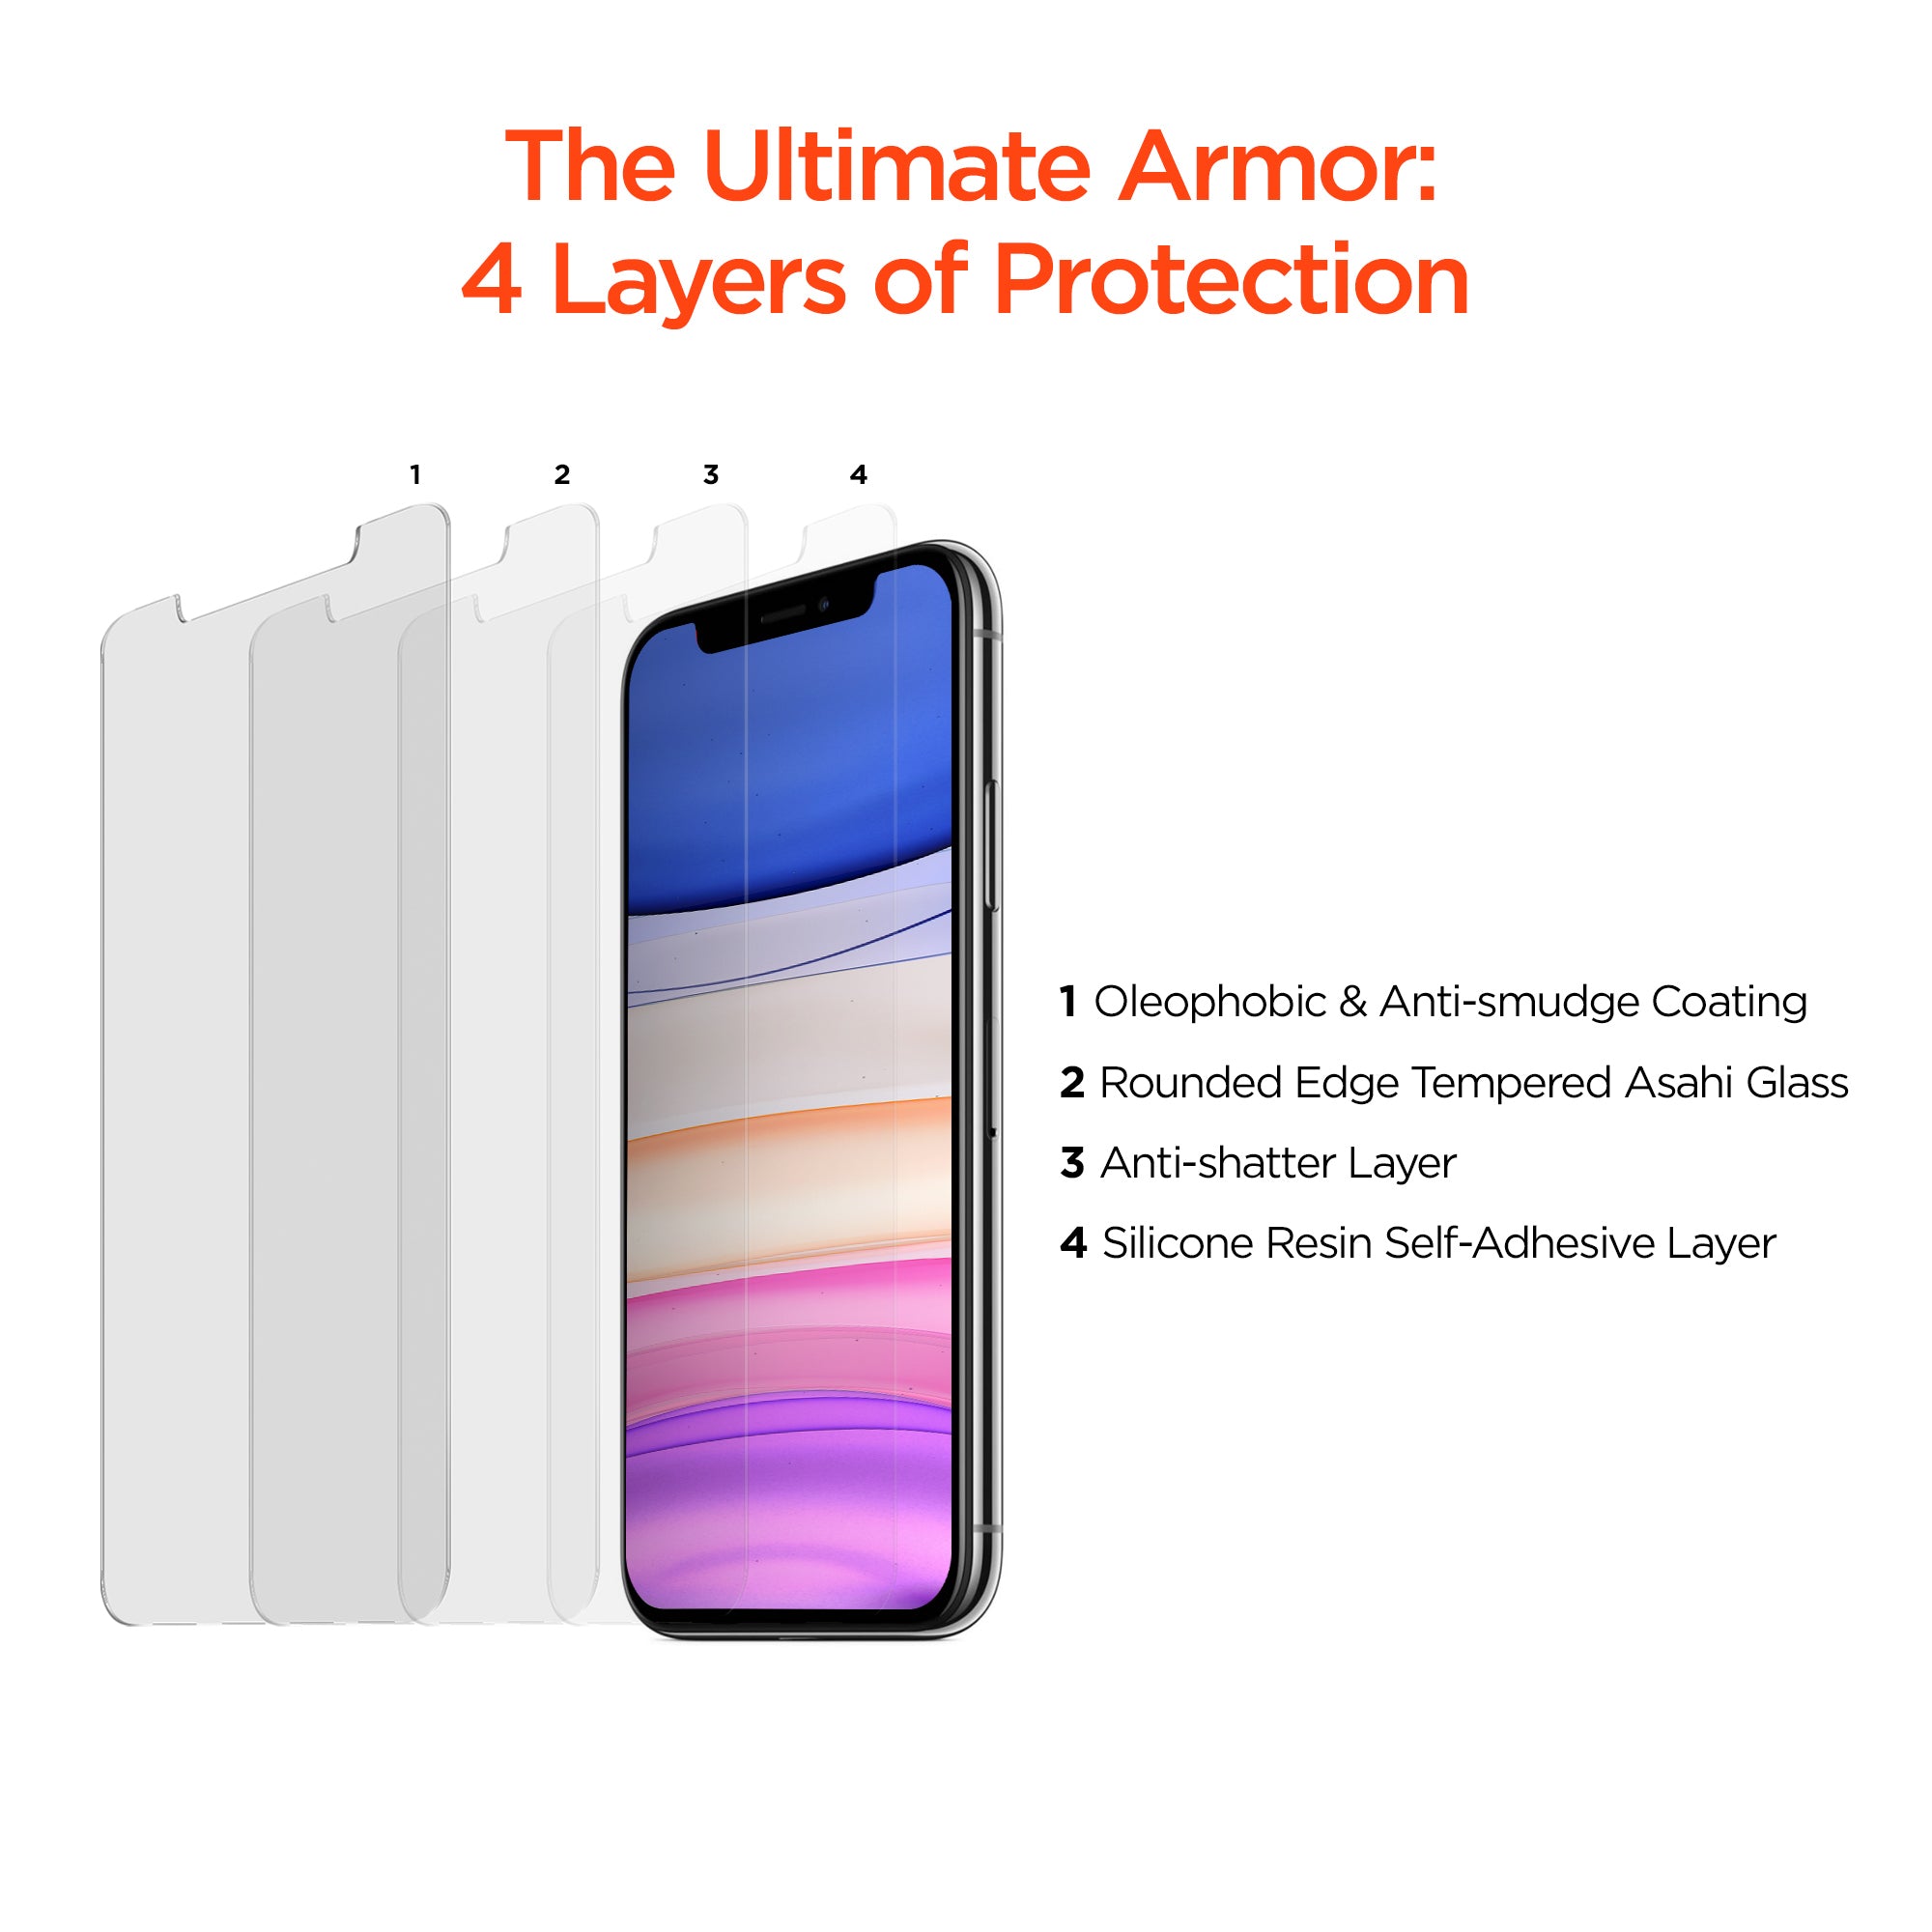 HyperGear HD Tempered Glass Screen Protector for iPhone 11 Pro Max/XS Max -  2 Pack – HYPERGEAR